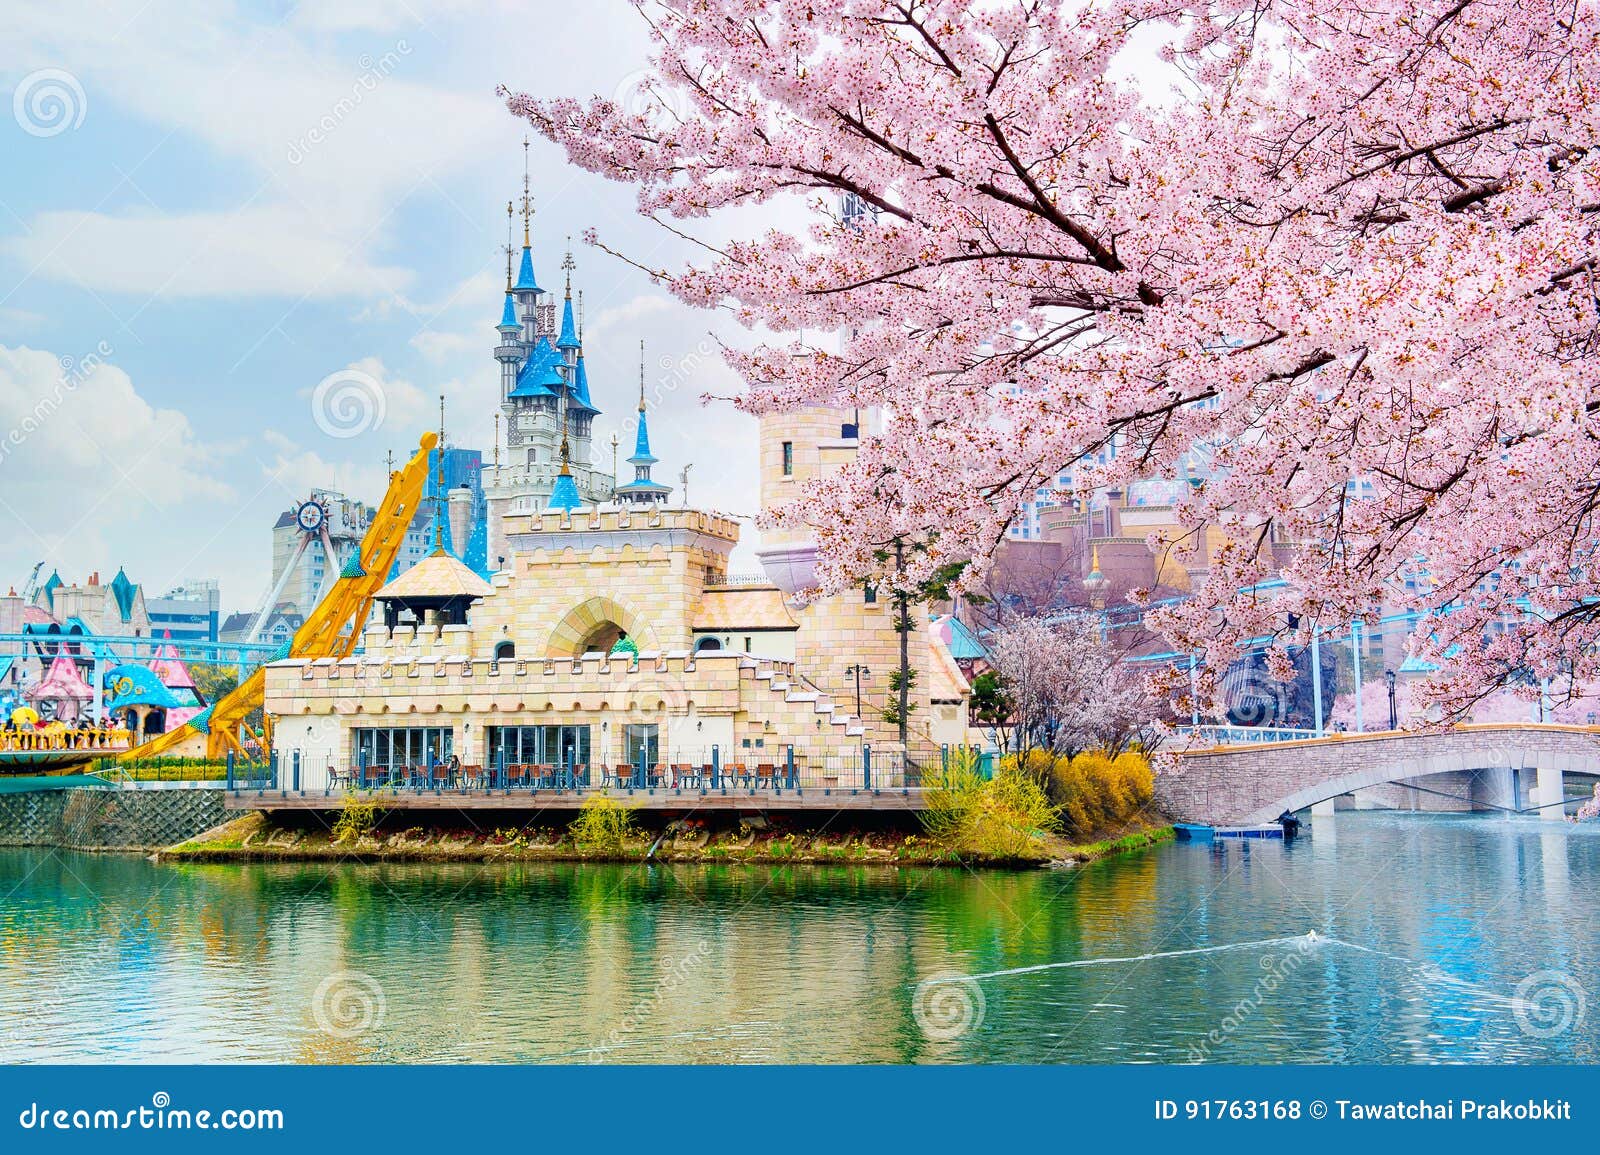 Lotte World Amusement Park And Cherry Blossom Of Spring A Major